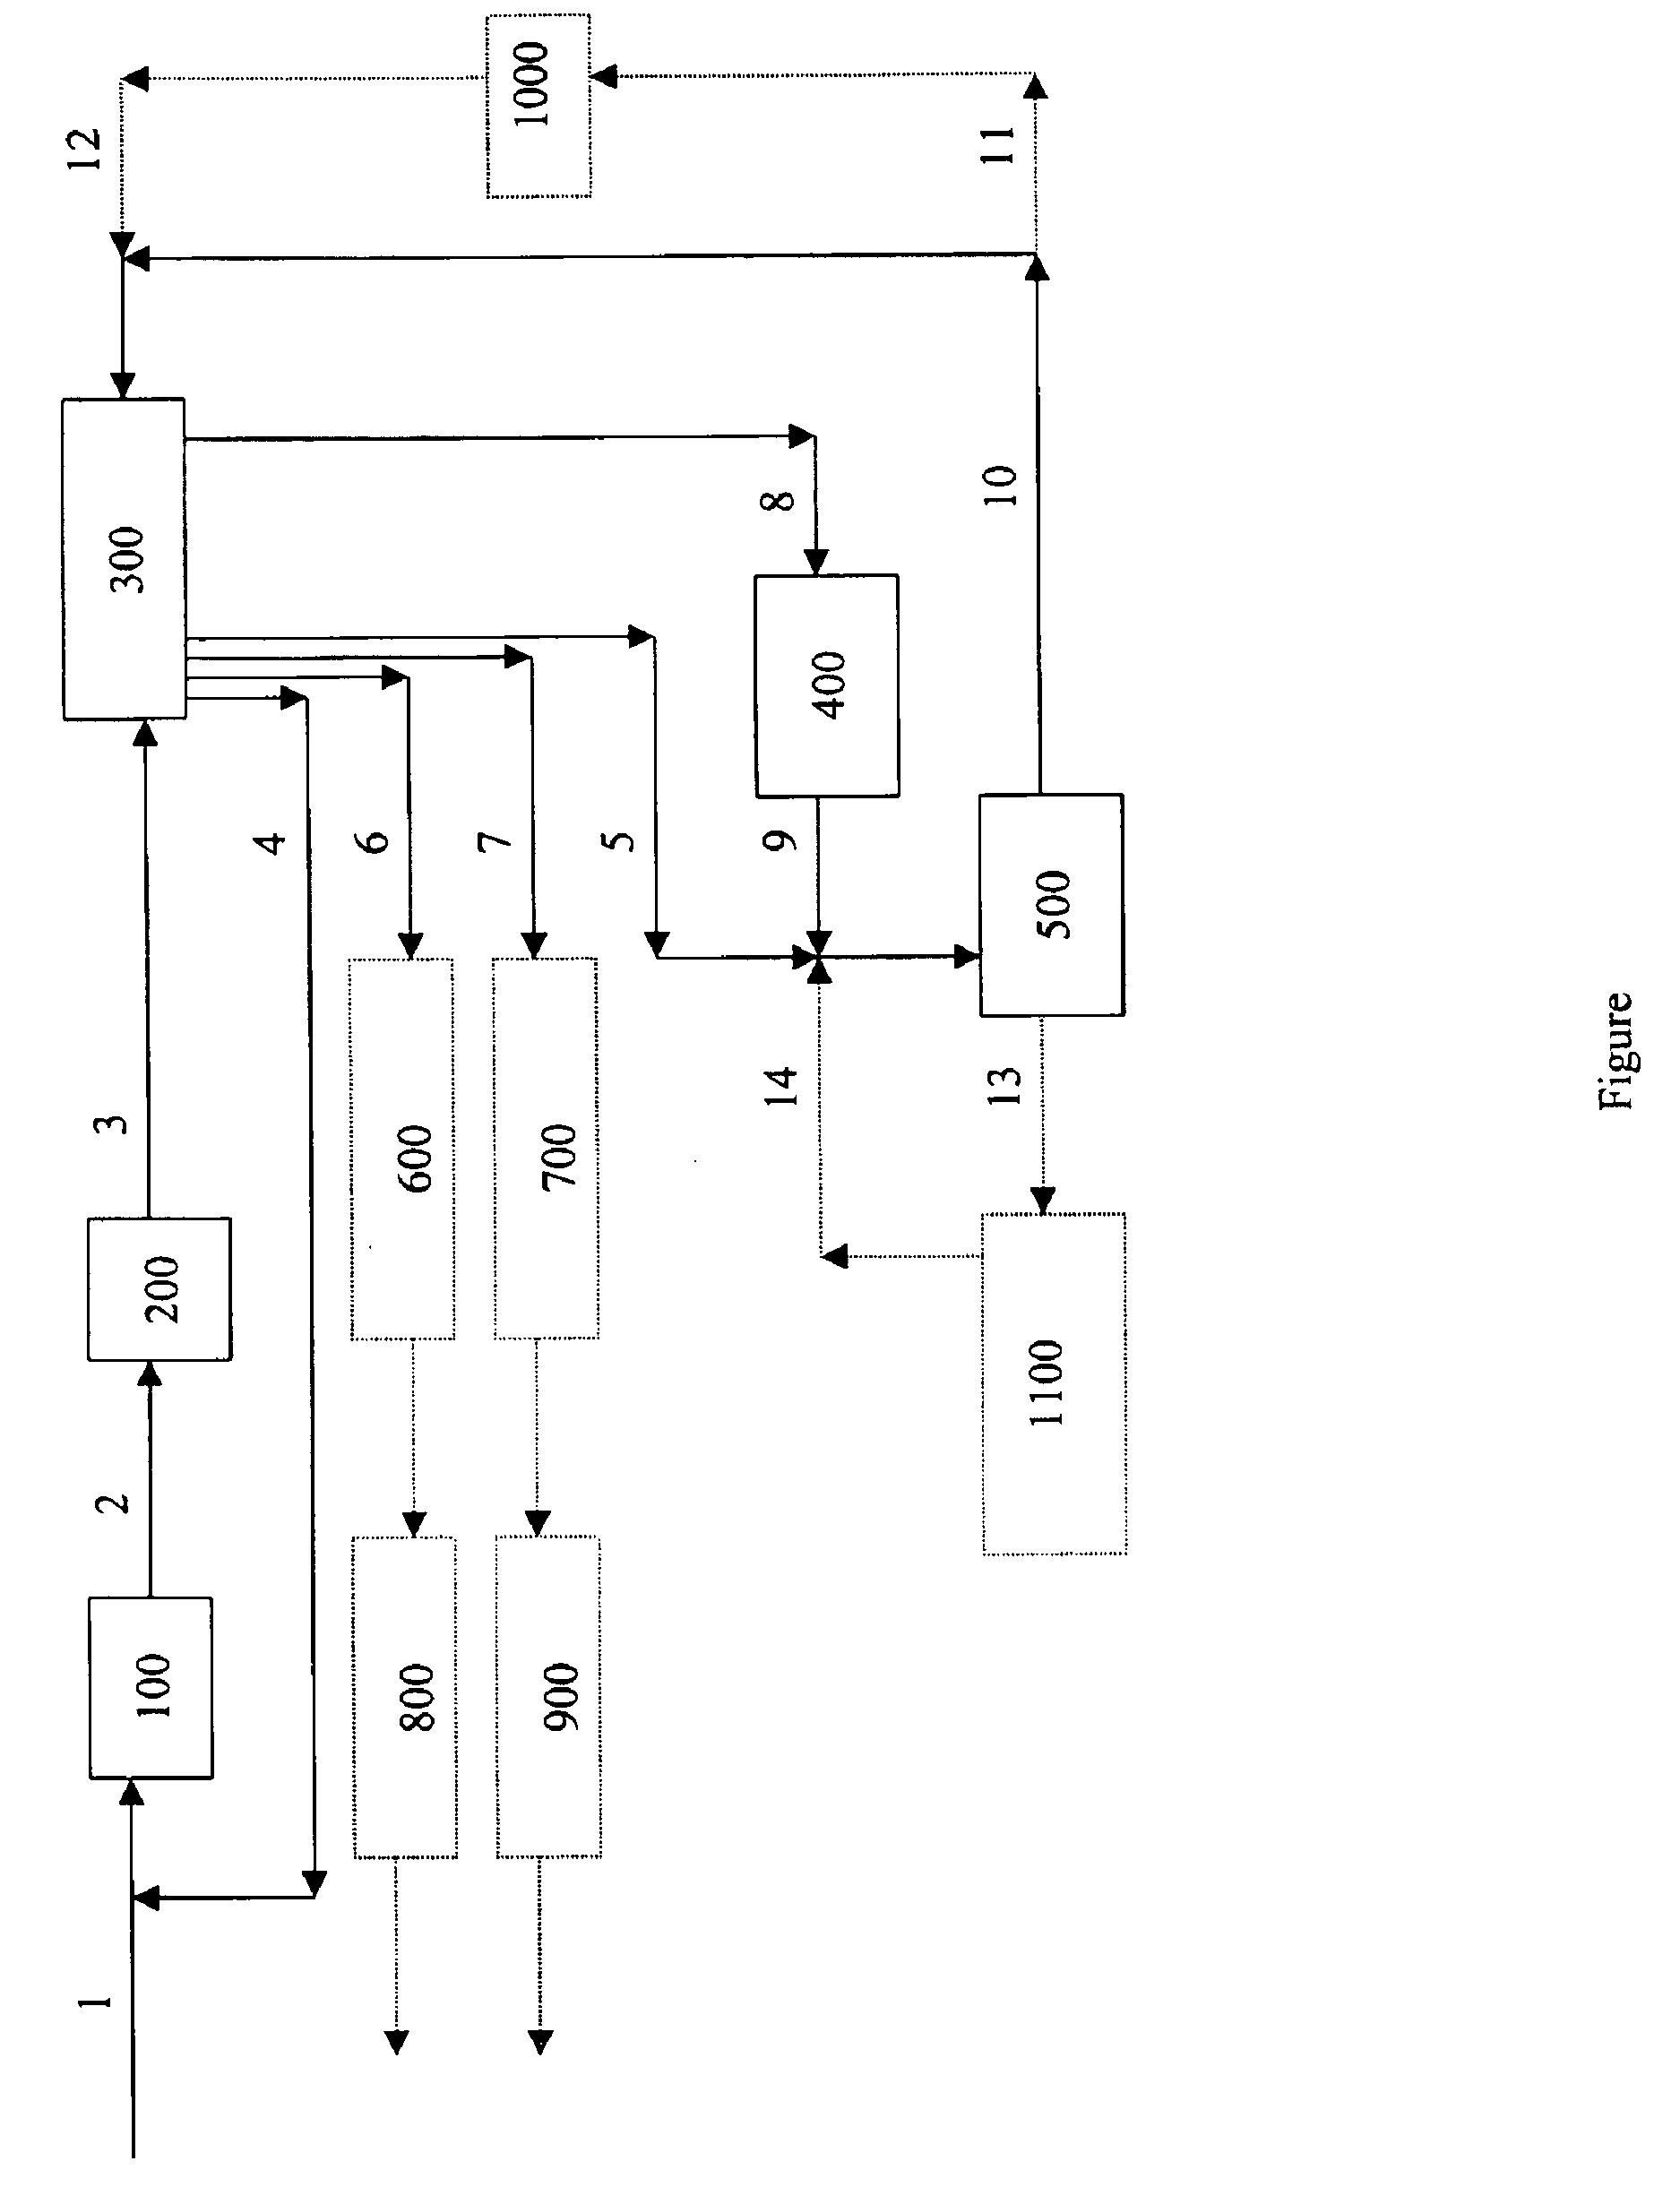 Conversion of syngas to distillate fuels